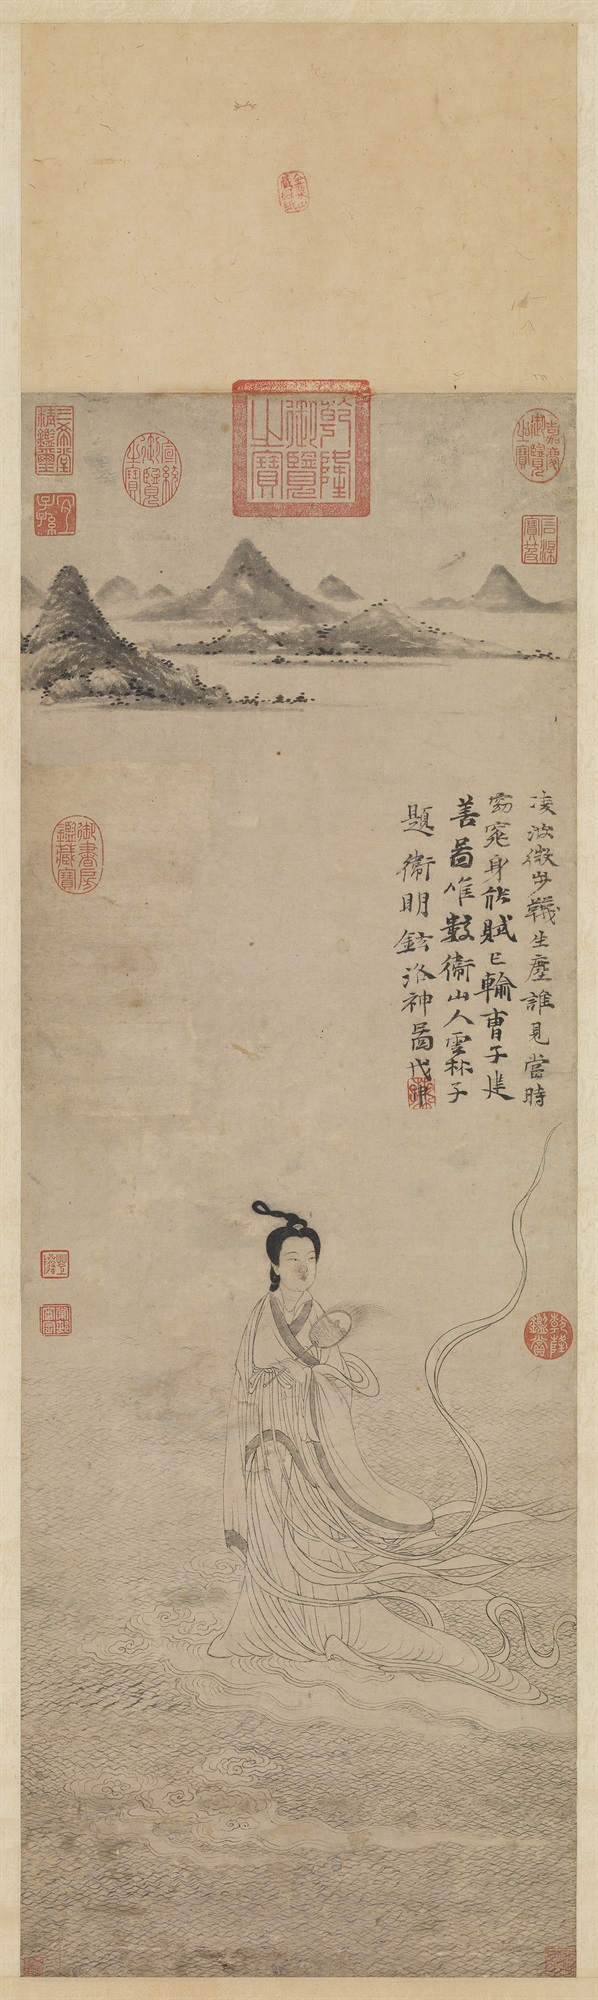 Goddess of the Luo River Wei Jiuding (ca. 14th c.), Yuan dynasty